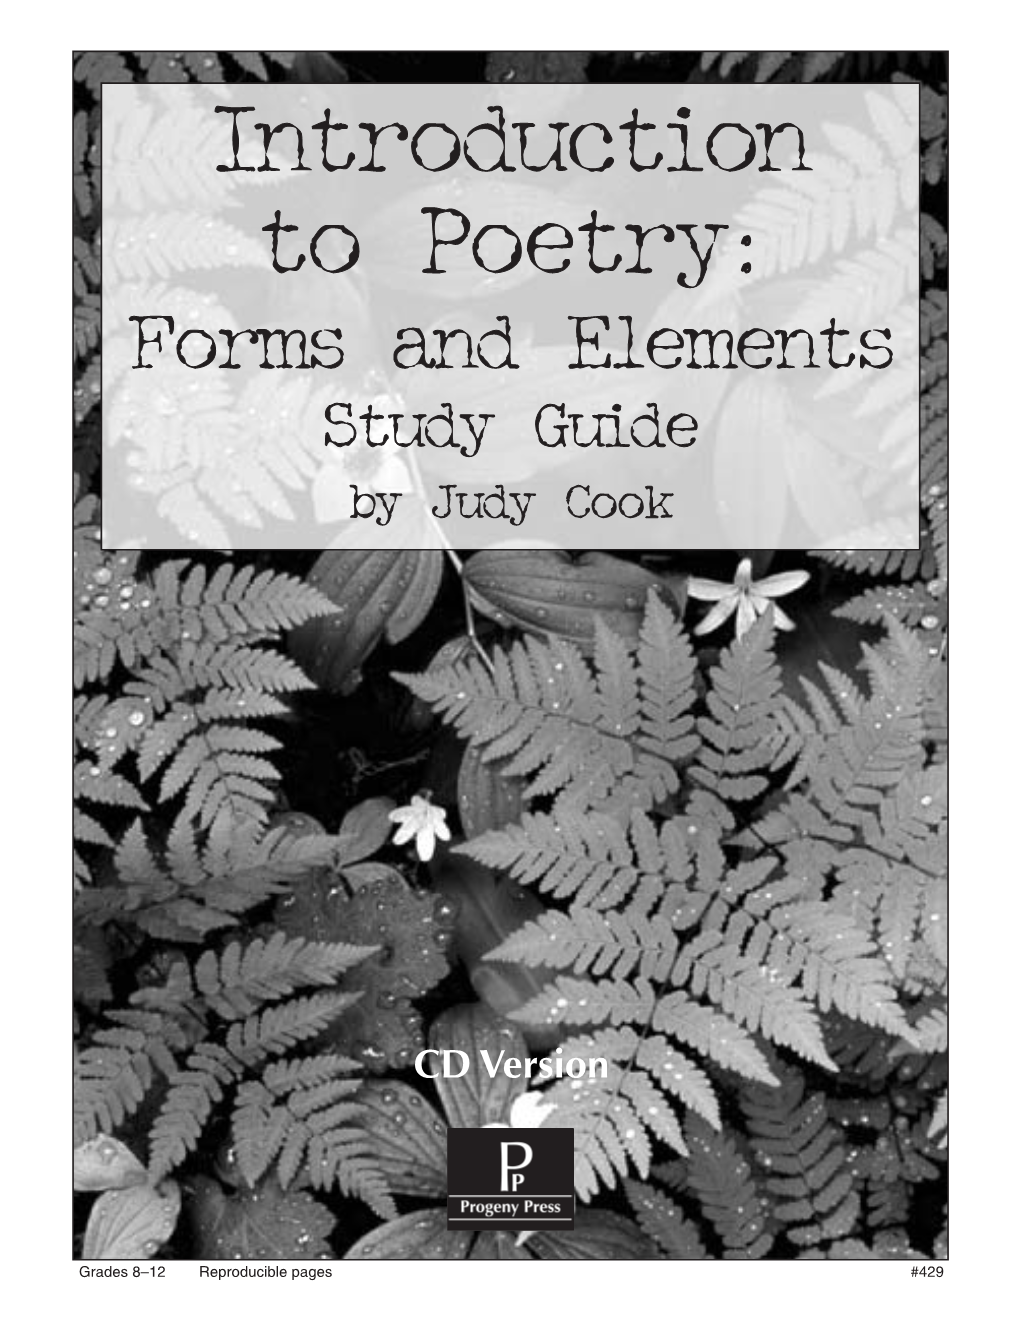 Introduction to Poetry: Forms and Elements Study Guide by Judy Cook